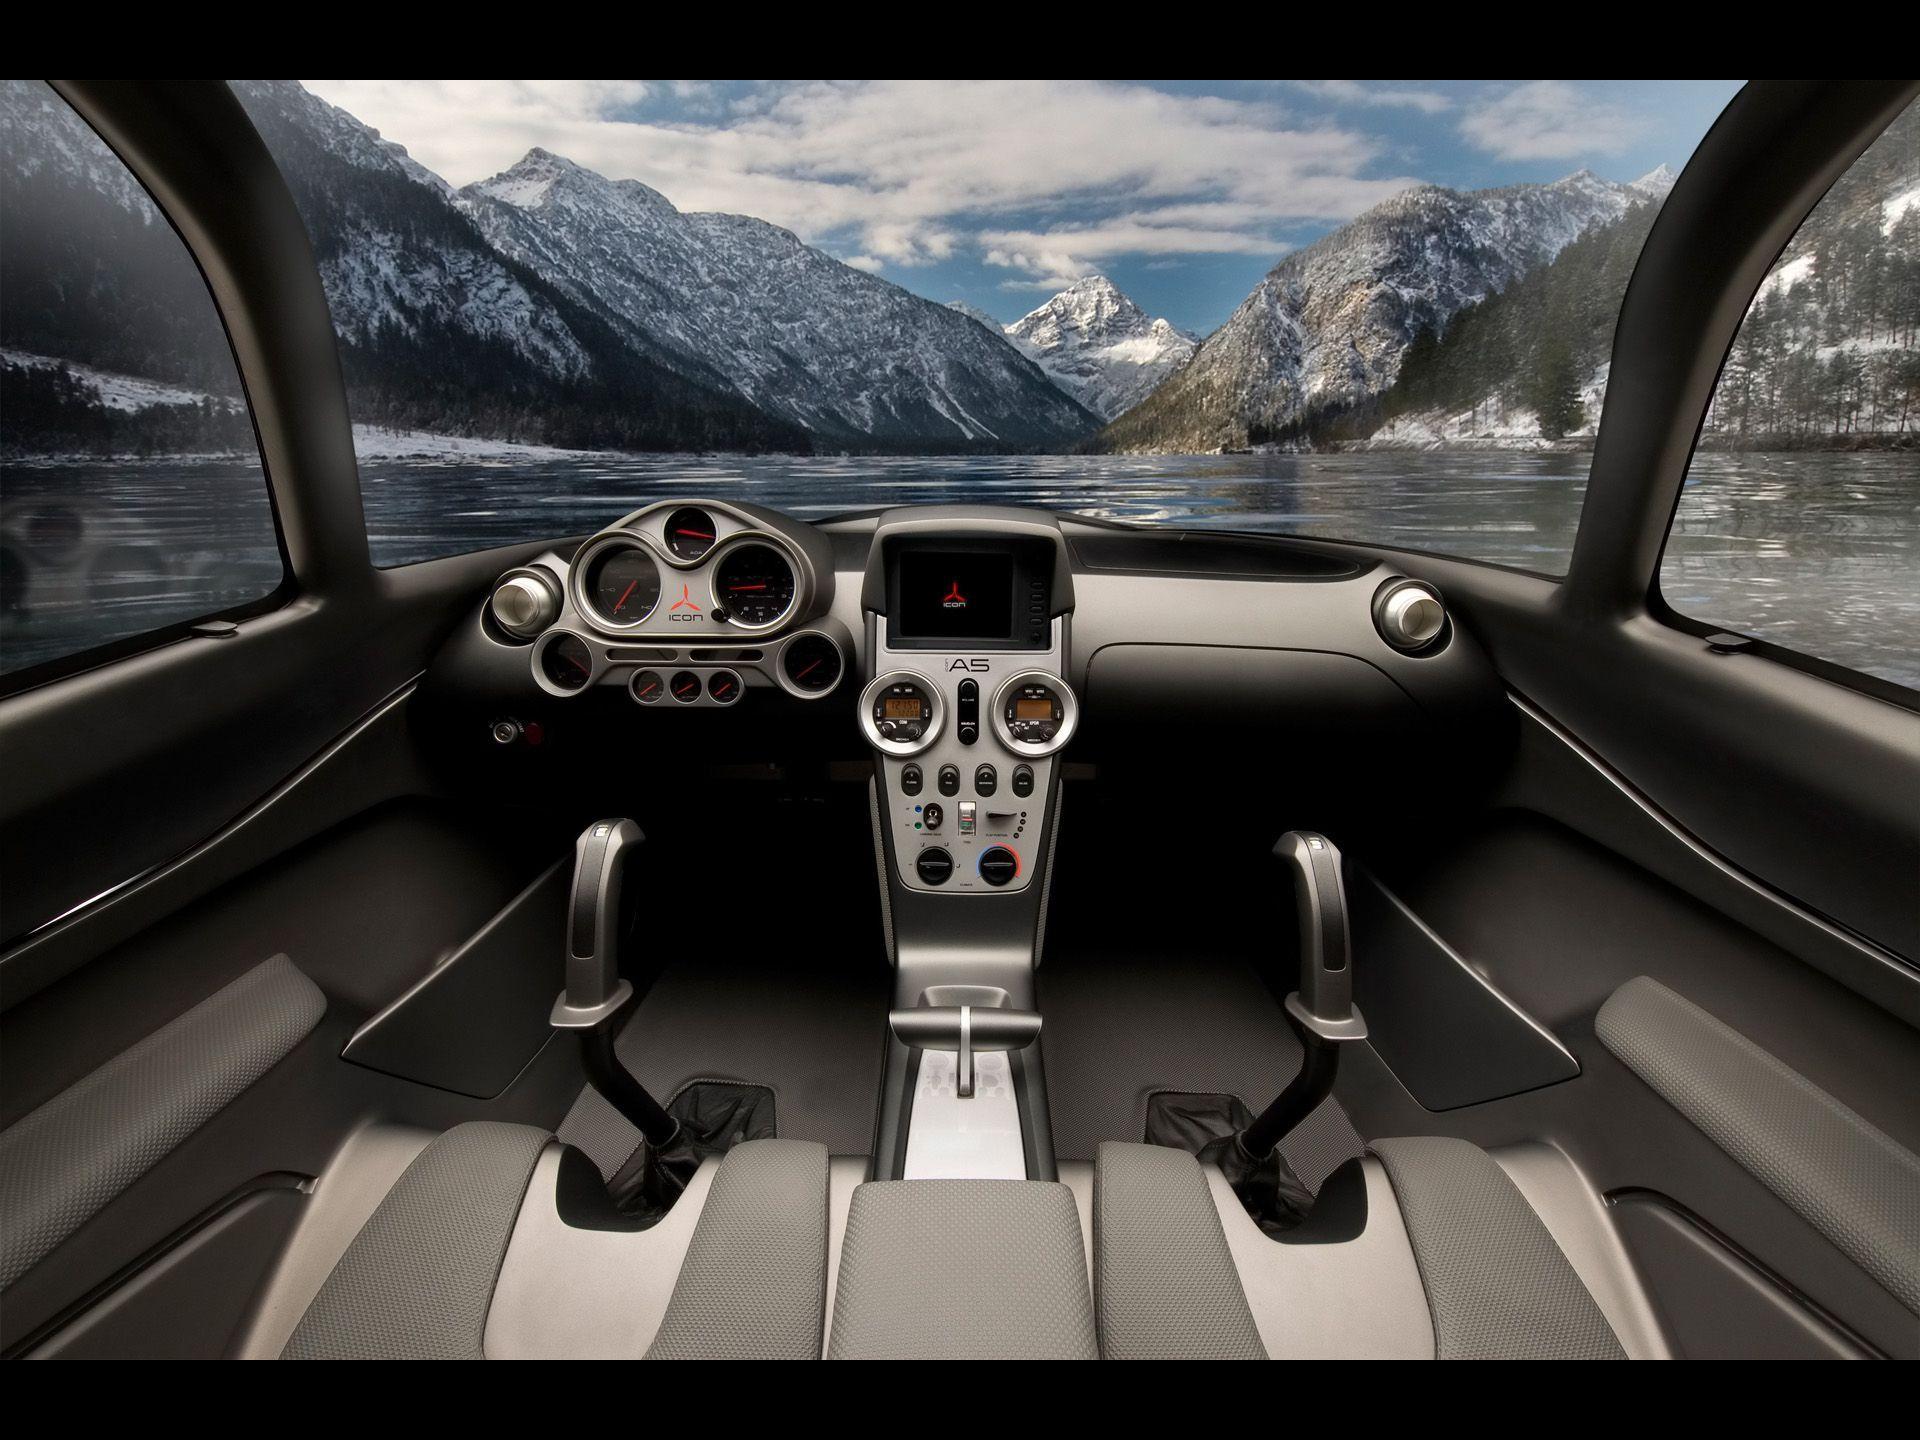 Jet Cockpit Wallpaper Download 58549 HD Picture. Top Background Free